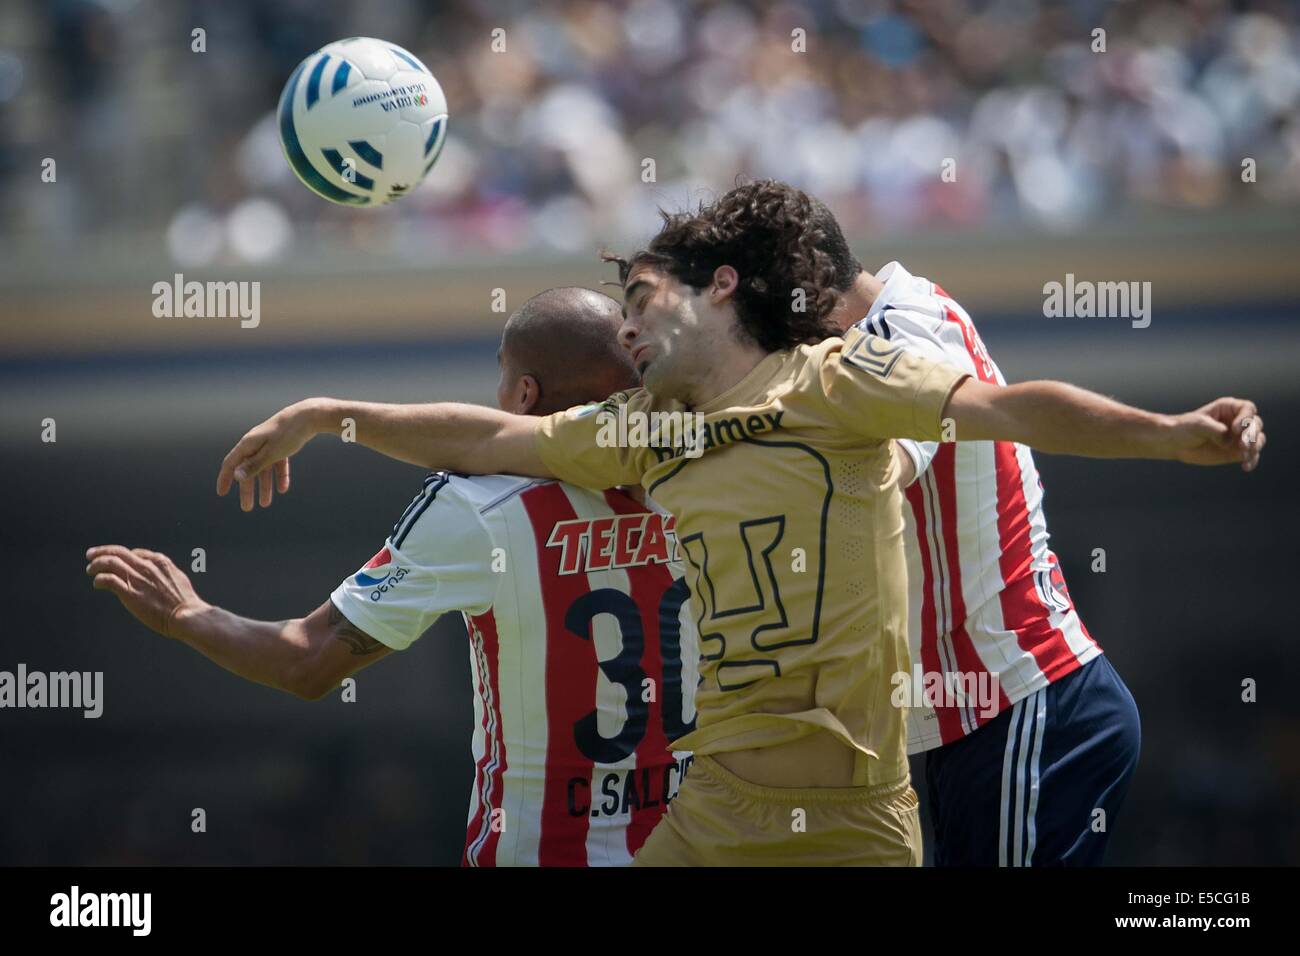 Mexico City, Mexico. 27th July, 2014. Matias Britos (C) of Pumas de la UNAM vies the ball with Carlos Salcido (L) of Chivas, during a match of the Opening Tournament 2014 of the MX League, celebrated in the University Olympic Stadium, in Mexico City, capital of Mexico, on July 27, 2014. © Pedro Mera/Xinhua/Alamy Live News Stock Photo